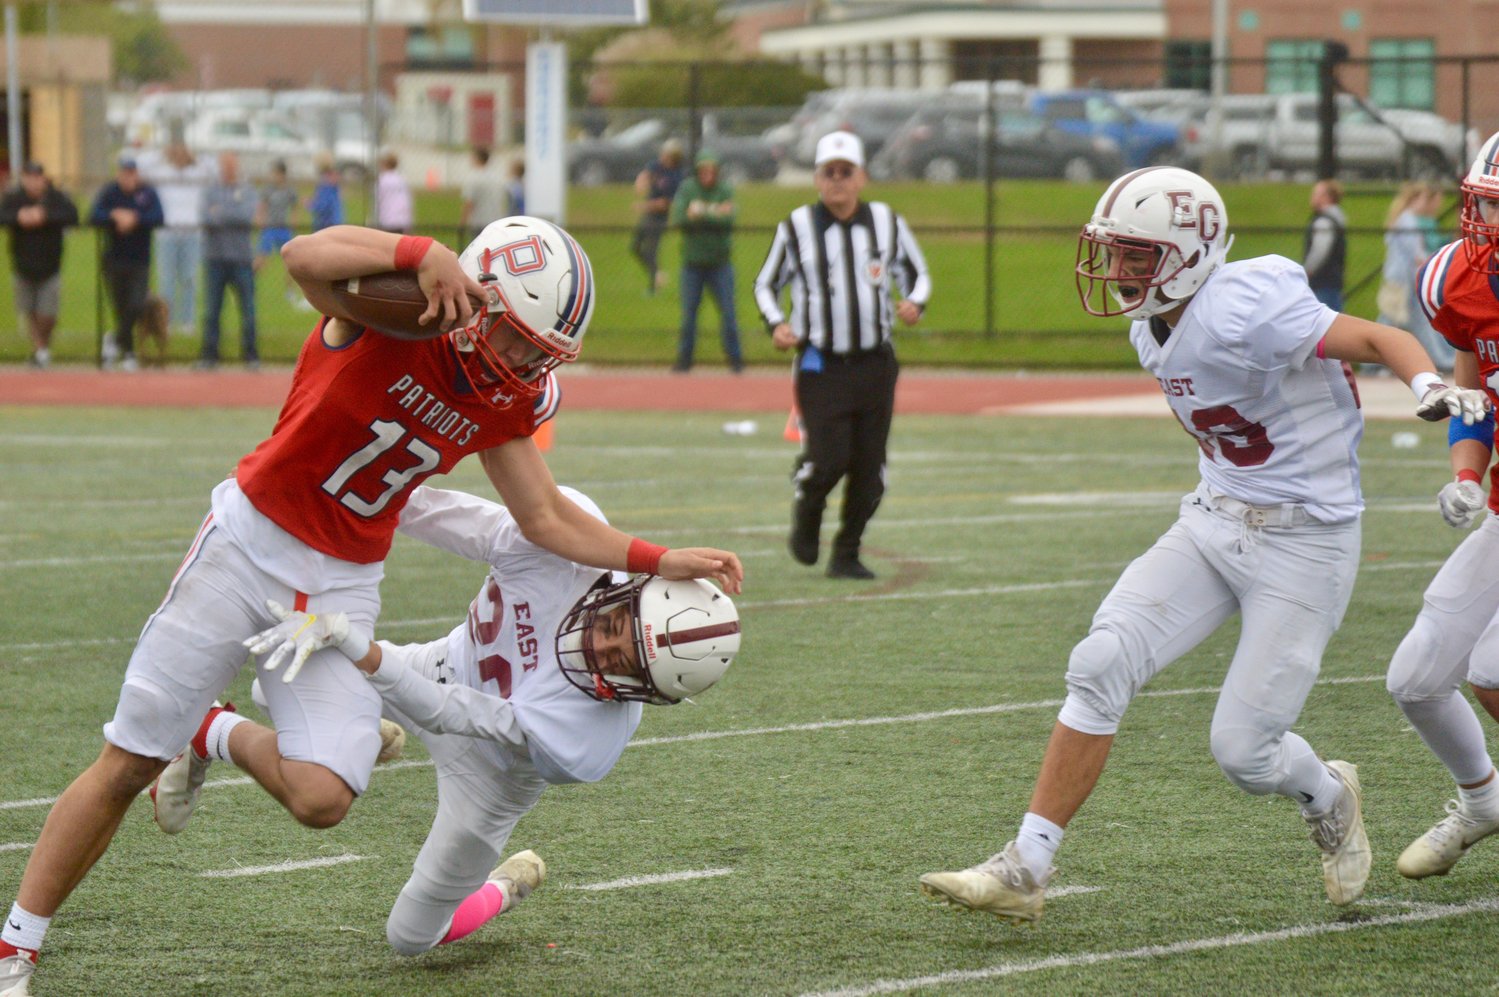 The Patriots’ Evan Beese works hard for a rushing gain as he tries to avoid a tackle.